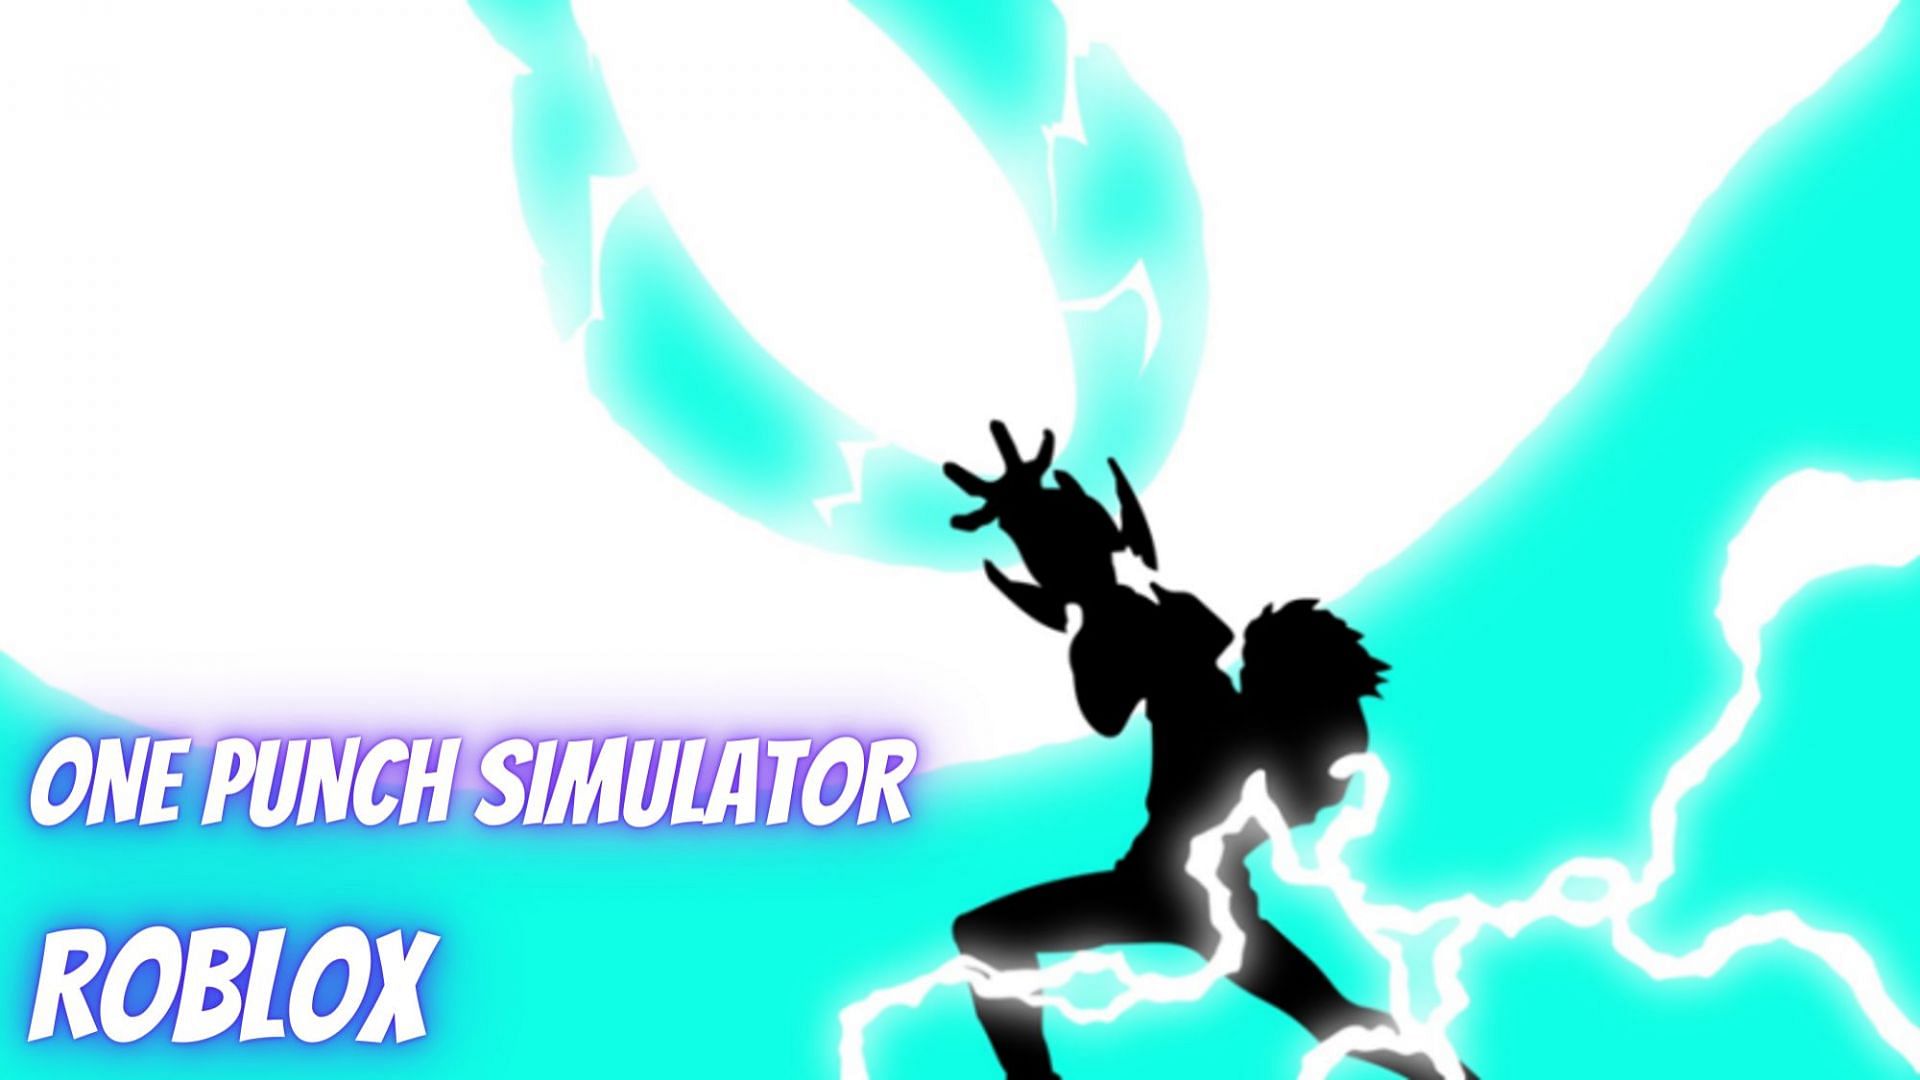 One Punch Simulator codes in Roblox Free Divine Pet, Power, and more (May 2022)